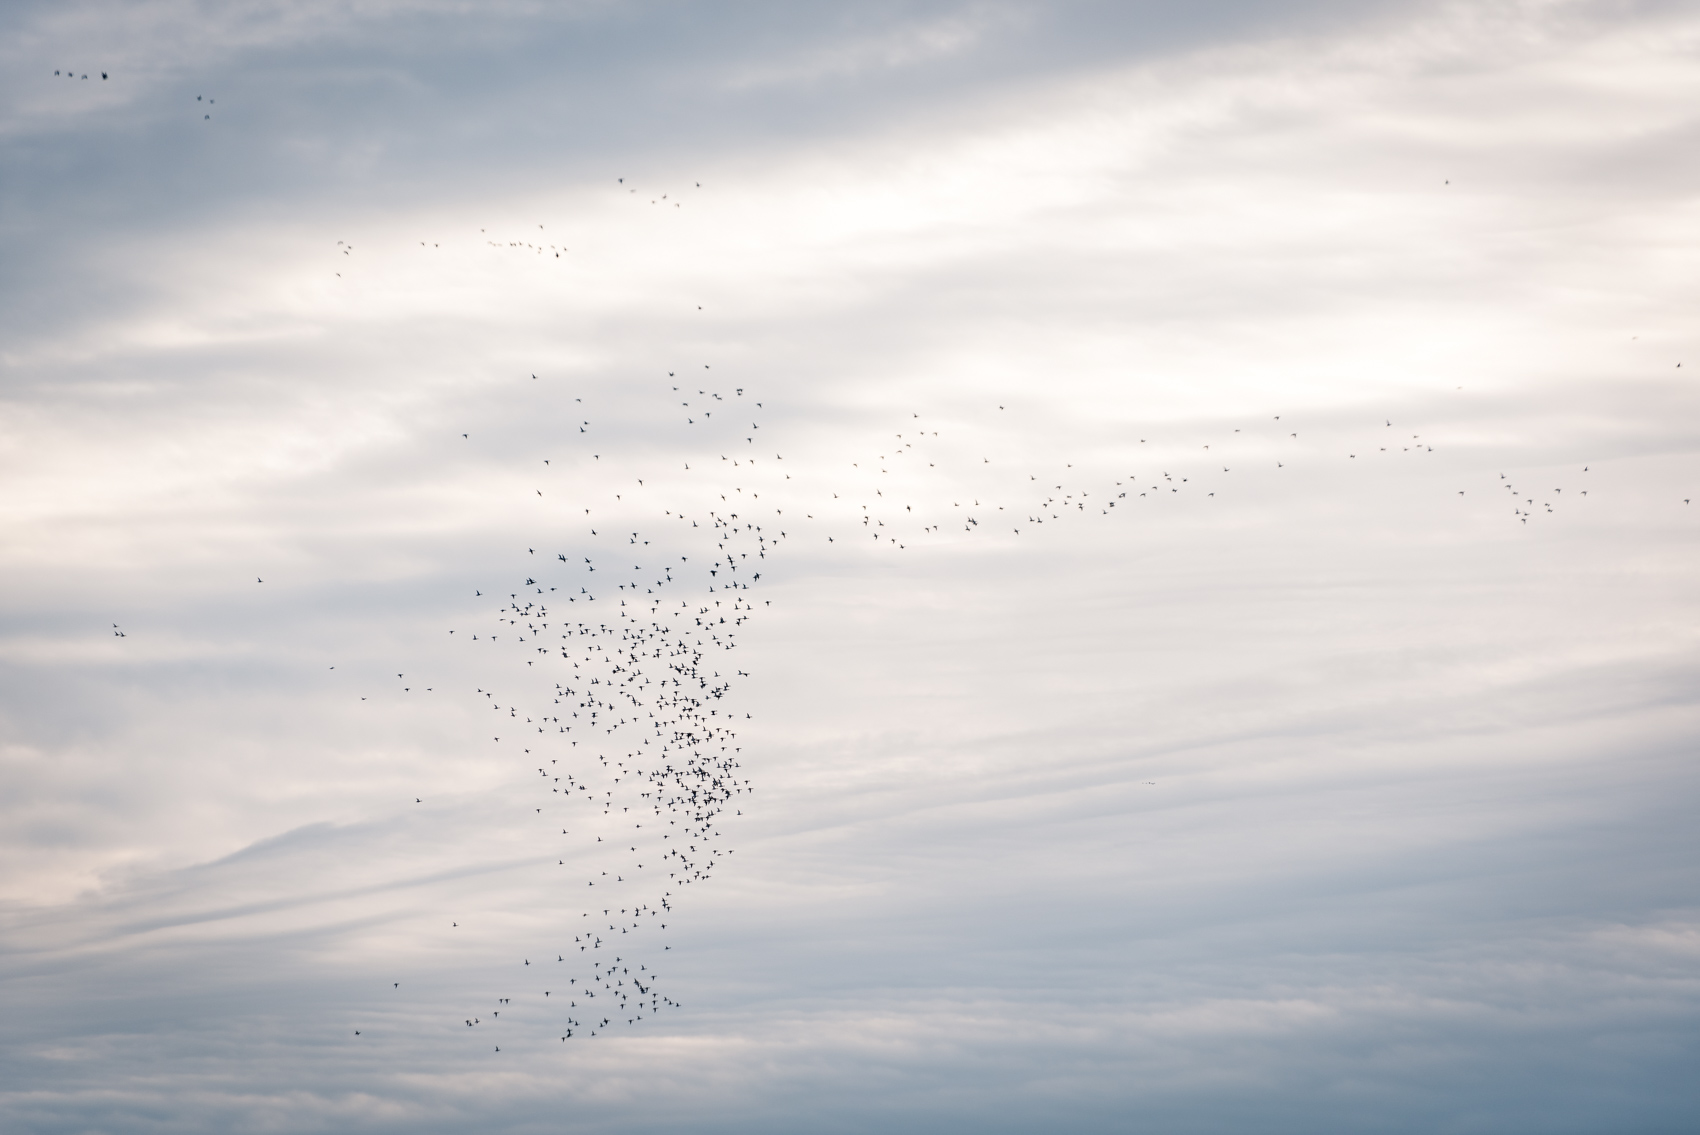 A flock of ducks flying in the morning sky in Long Point, Ontario